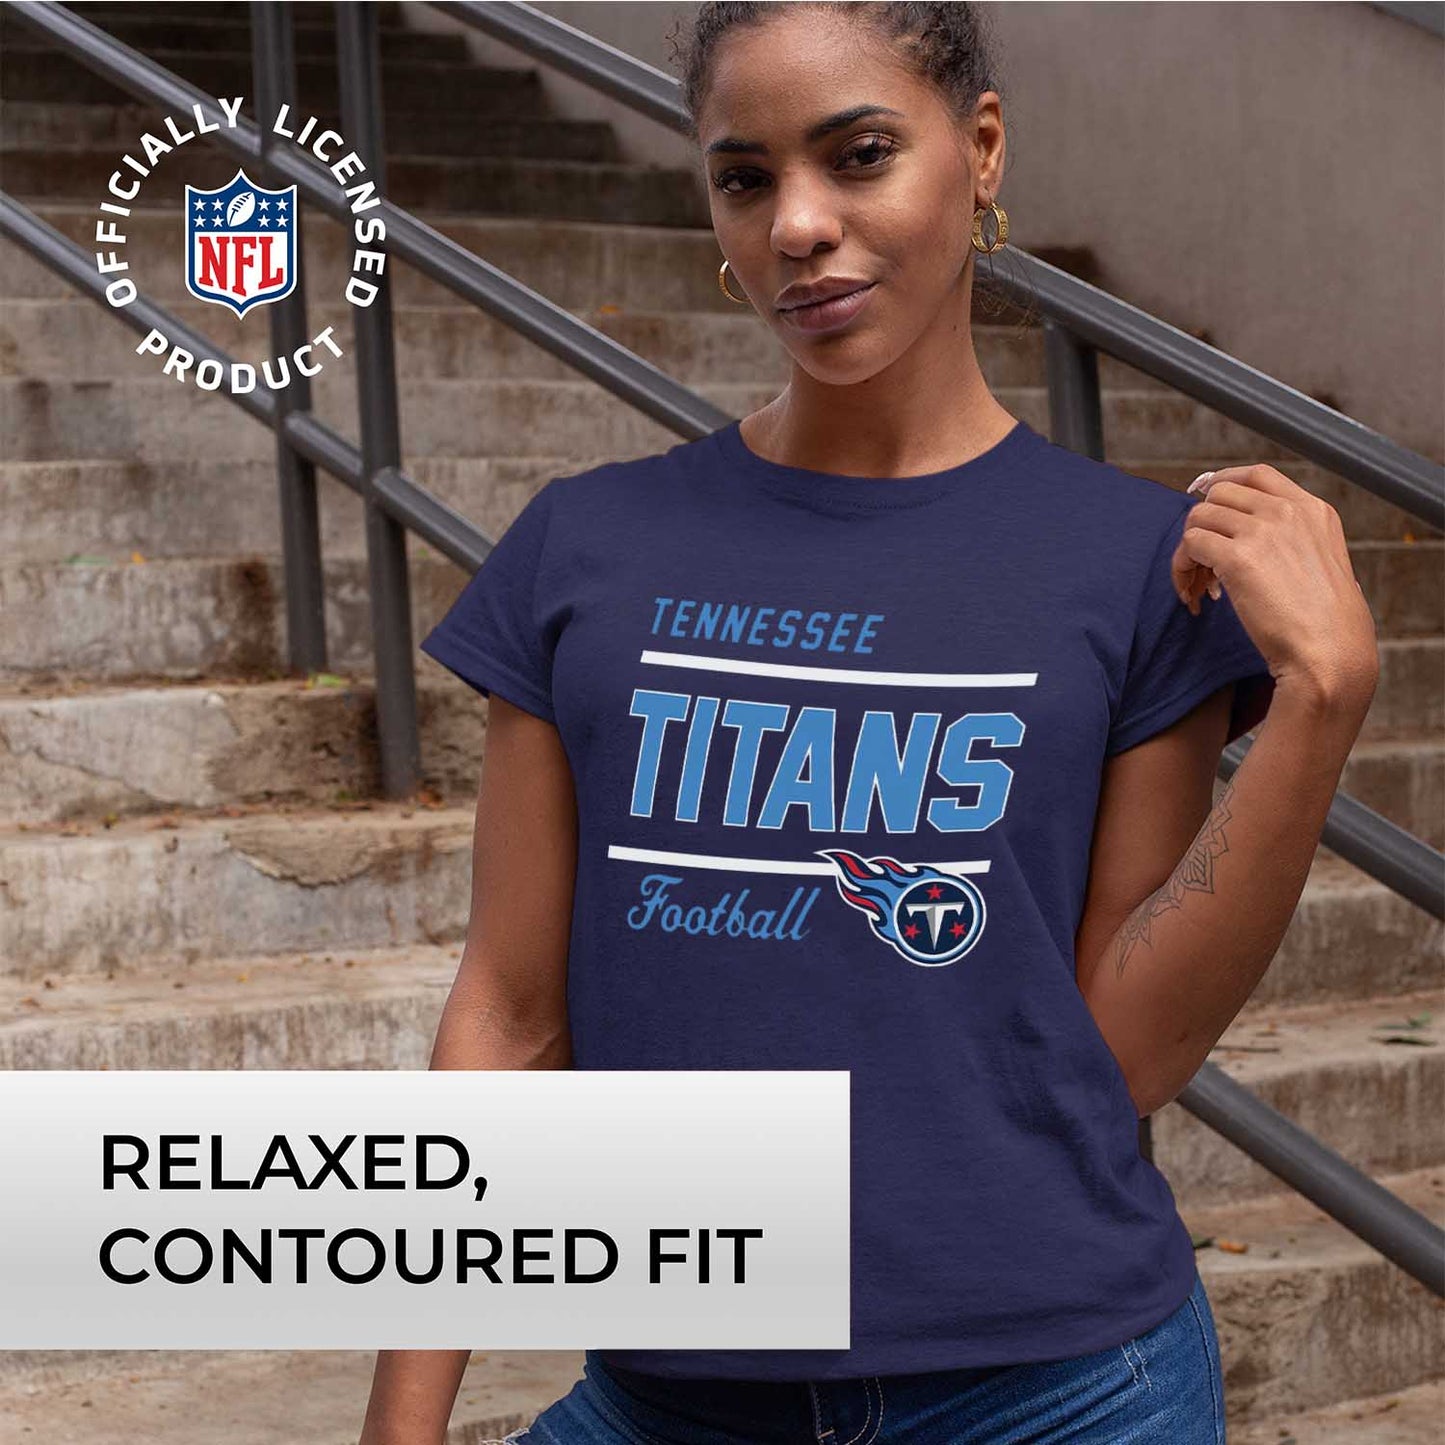 Tennessee Titans NFL Womens Plus Size Relaxed Fit T-Shirt - Navy